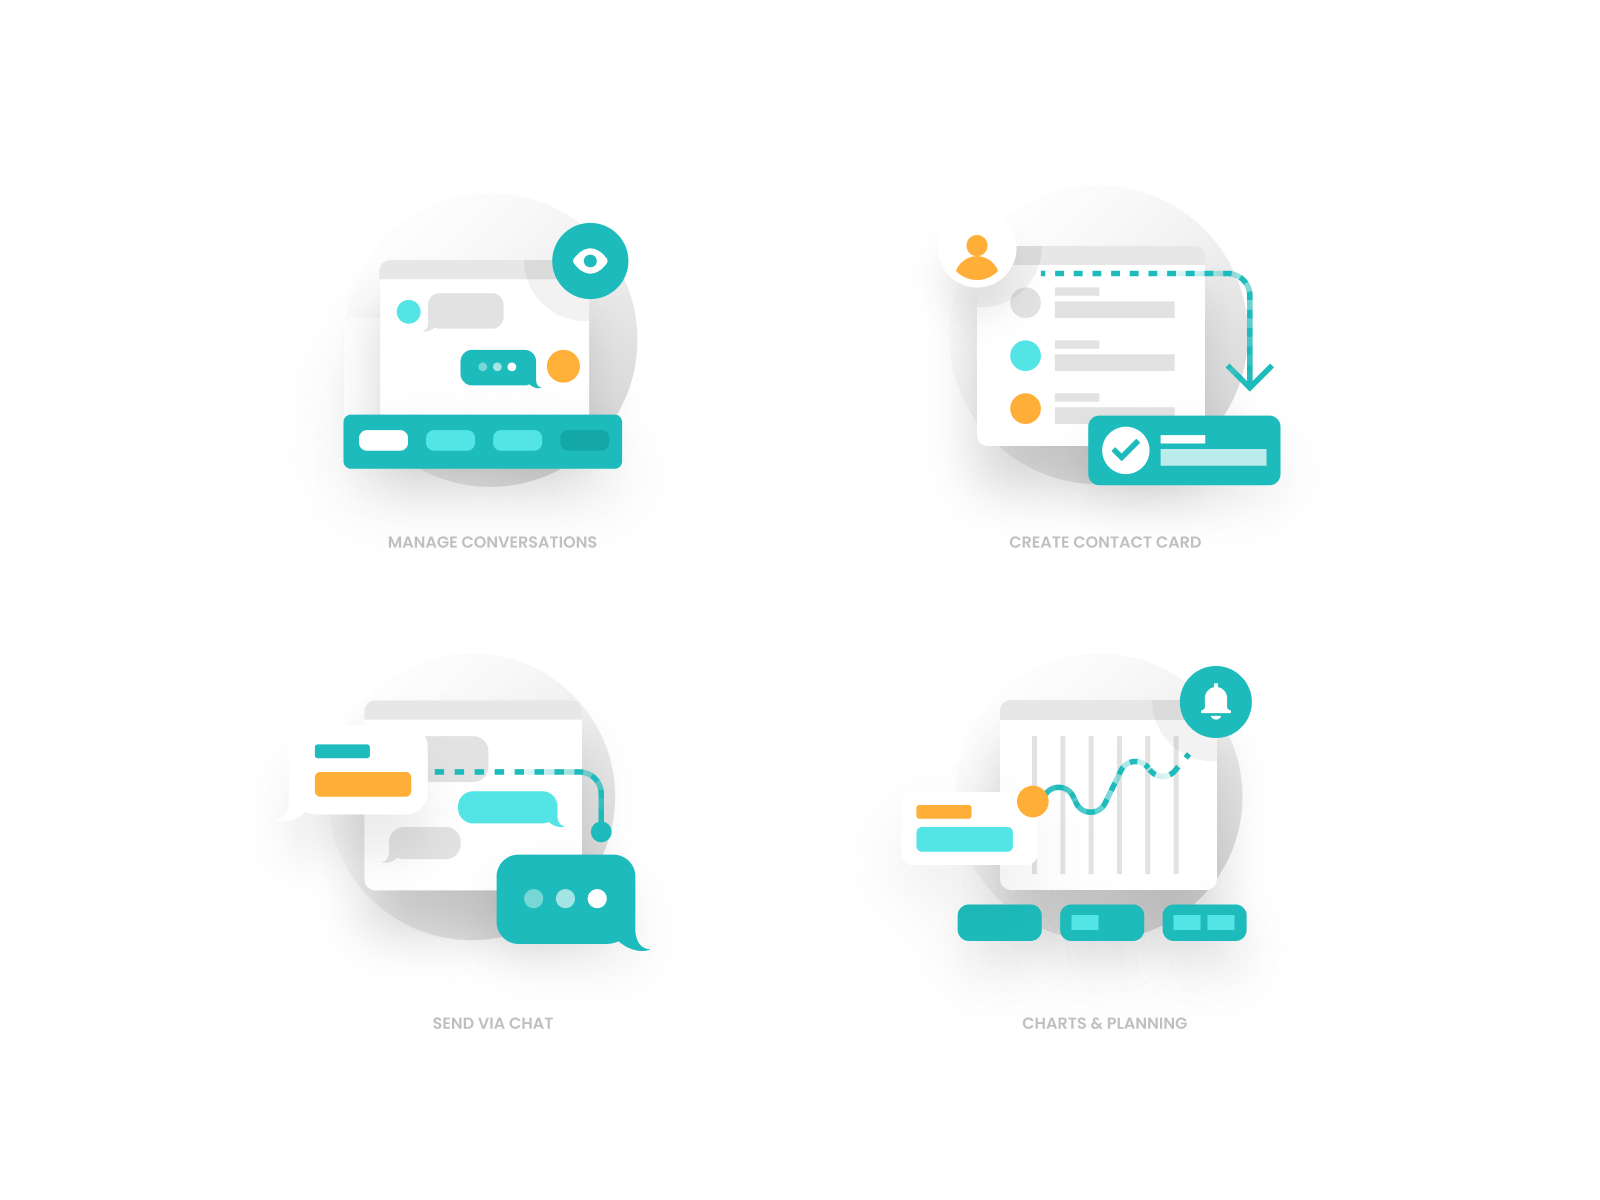 Mini Illos - Messaging by Evan Place for Heyo on Dribbble